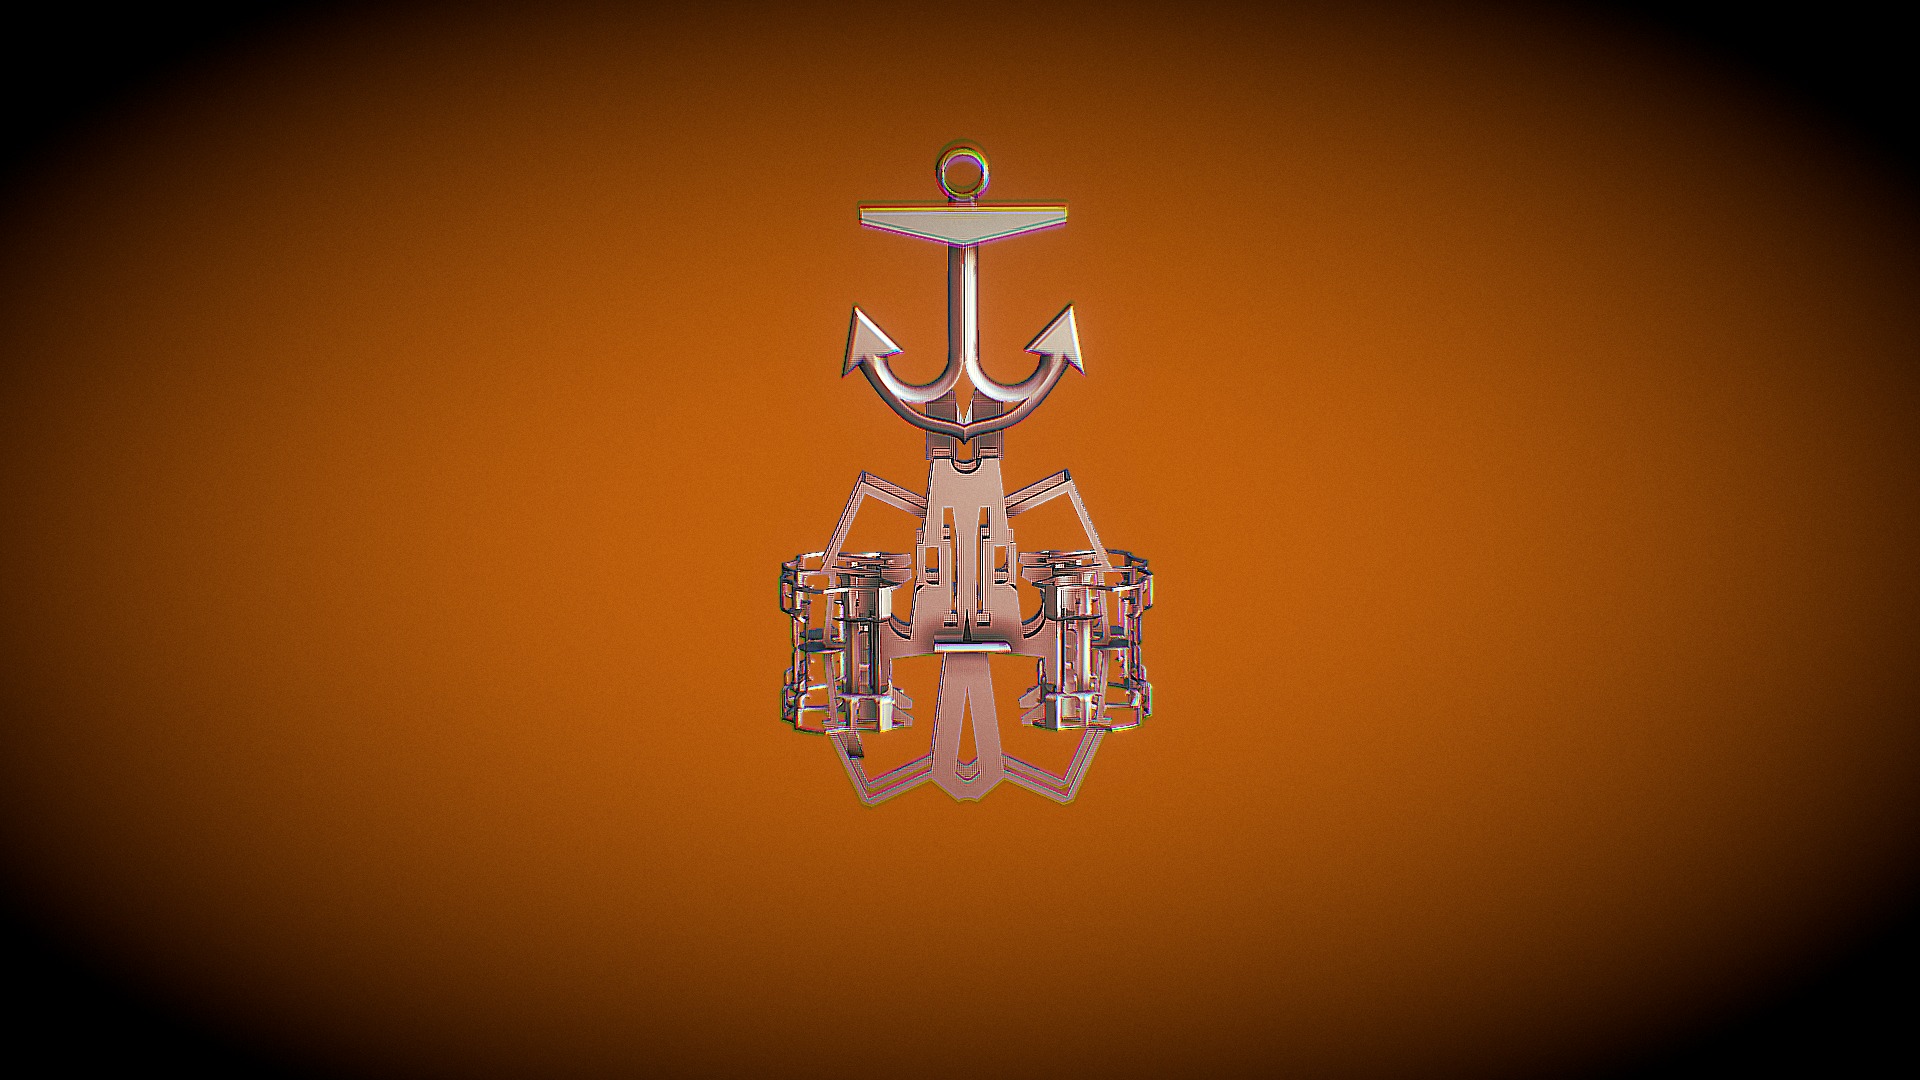 3D model anchor - This is a 3D model of the anchor. The 3D model is about a metal object with a design on it.